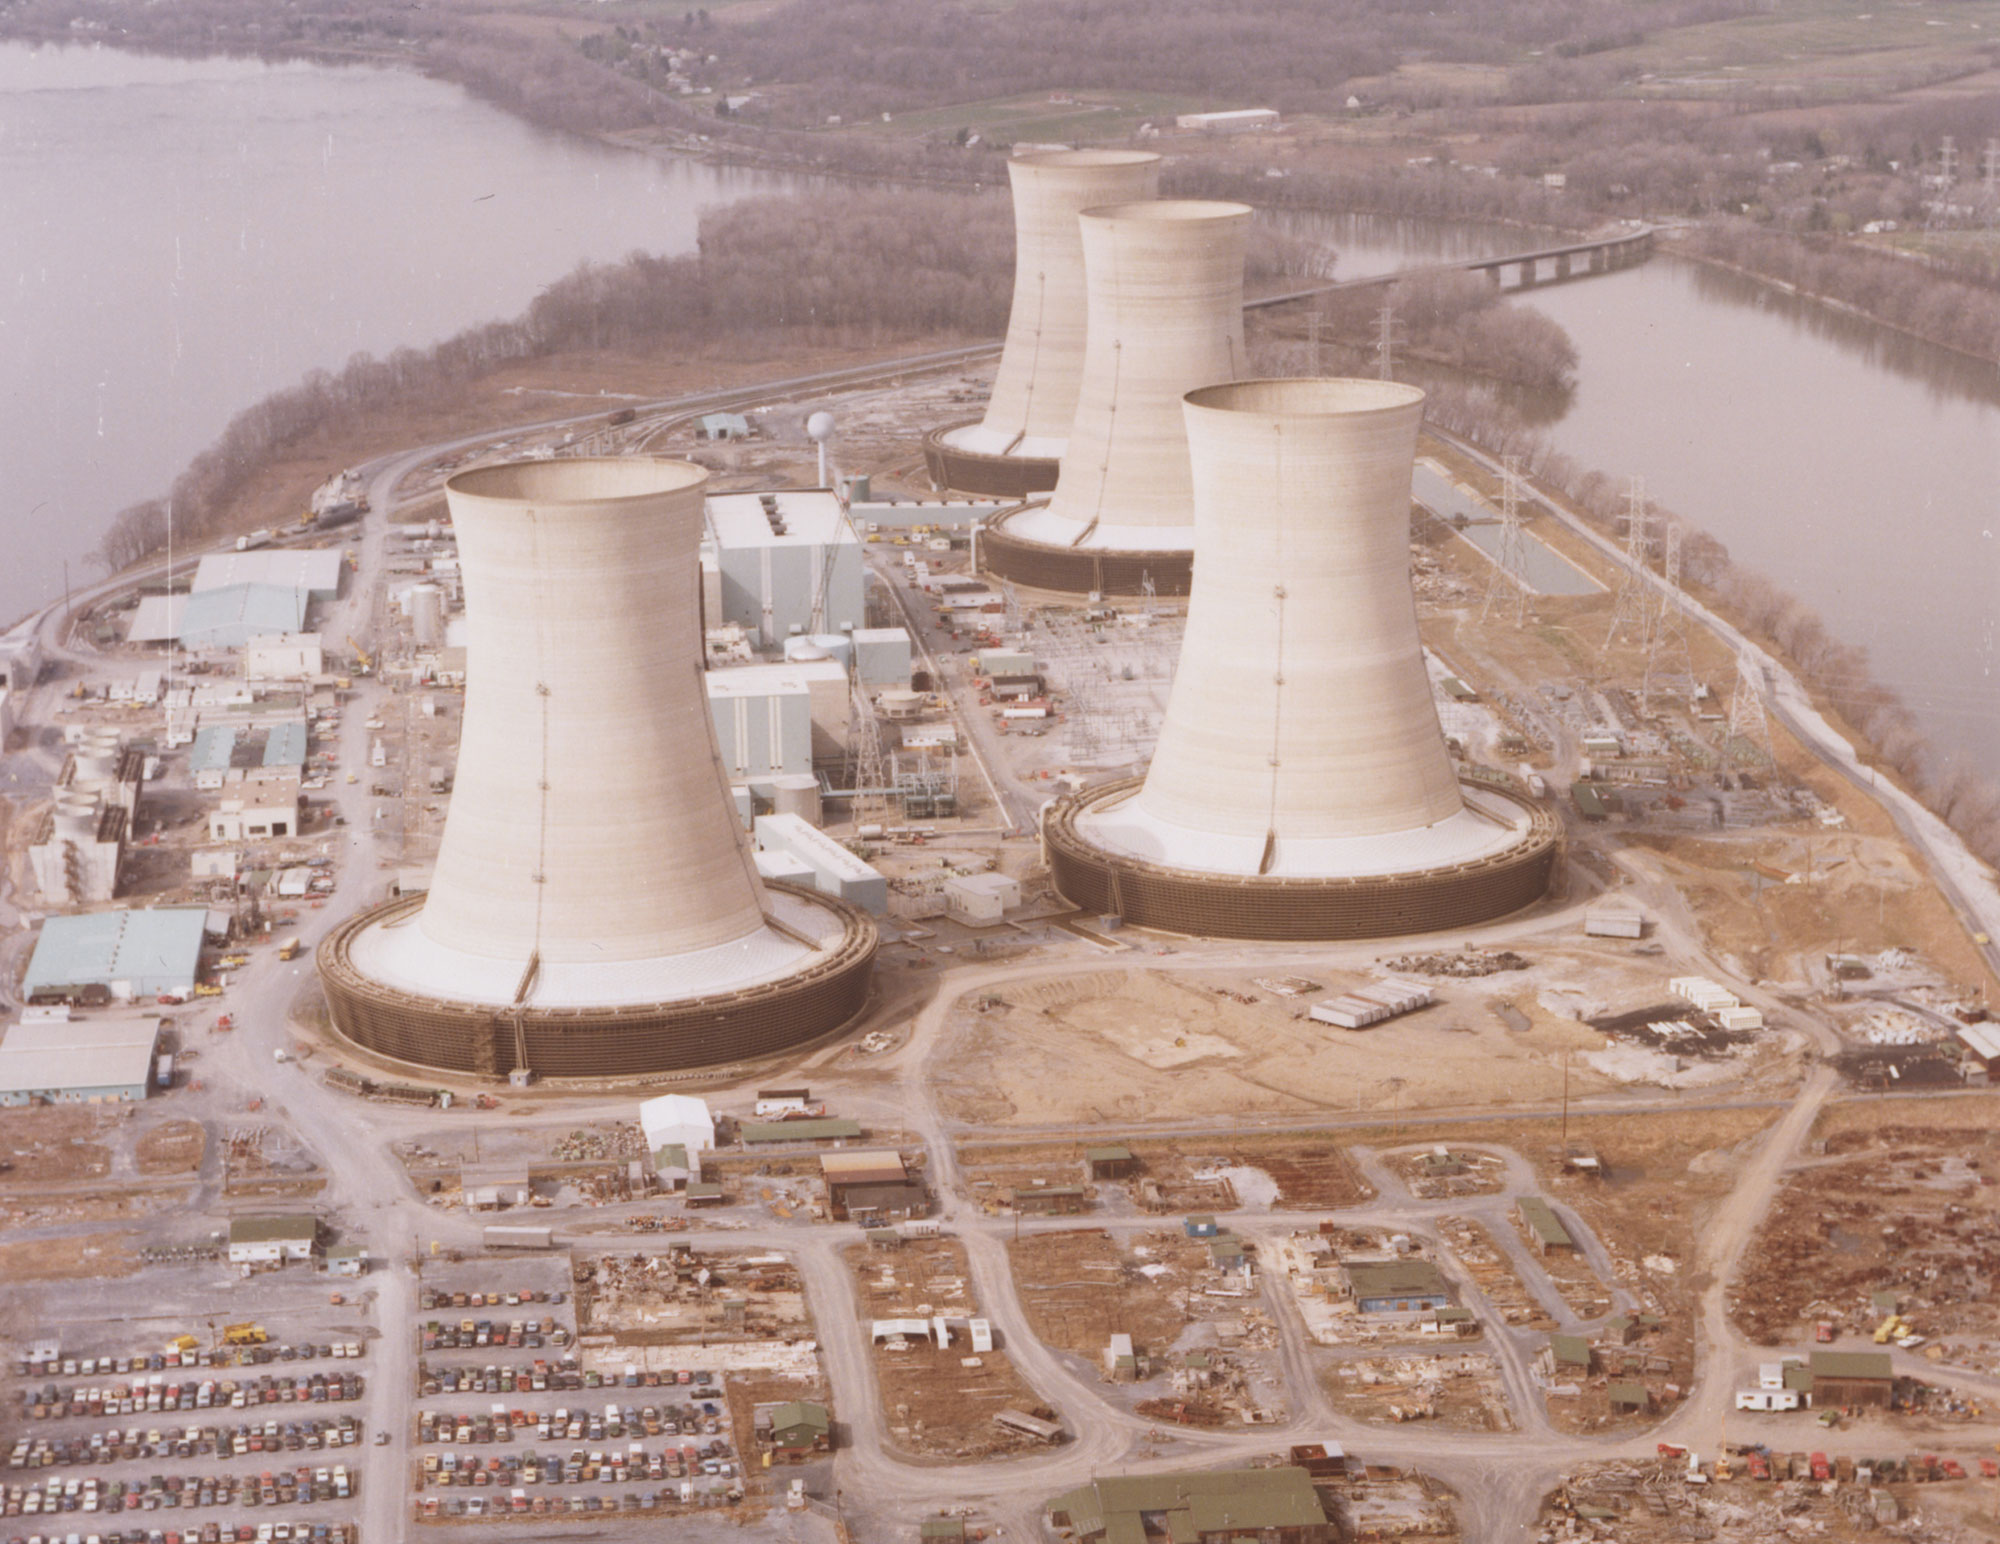 Aerial photograph of Three Mile Island Nuclear Station in 1979. The photo shows four cooling towers and associated structures on a point of land surrounded by water in the background.